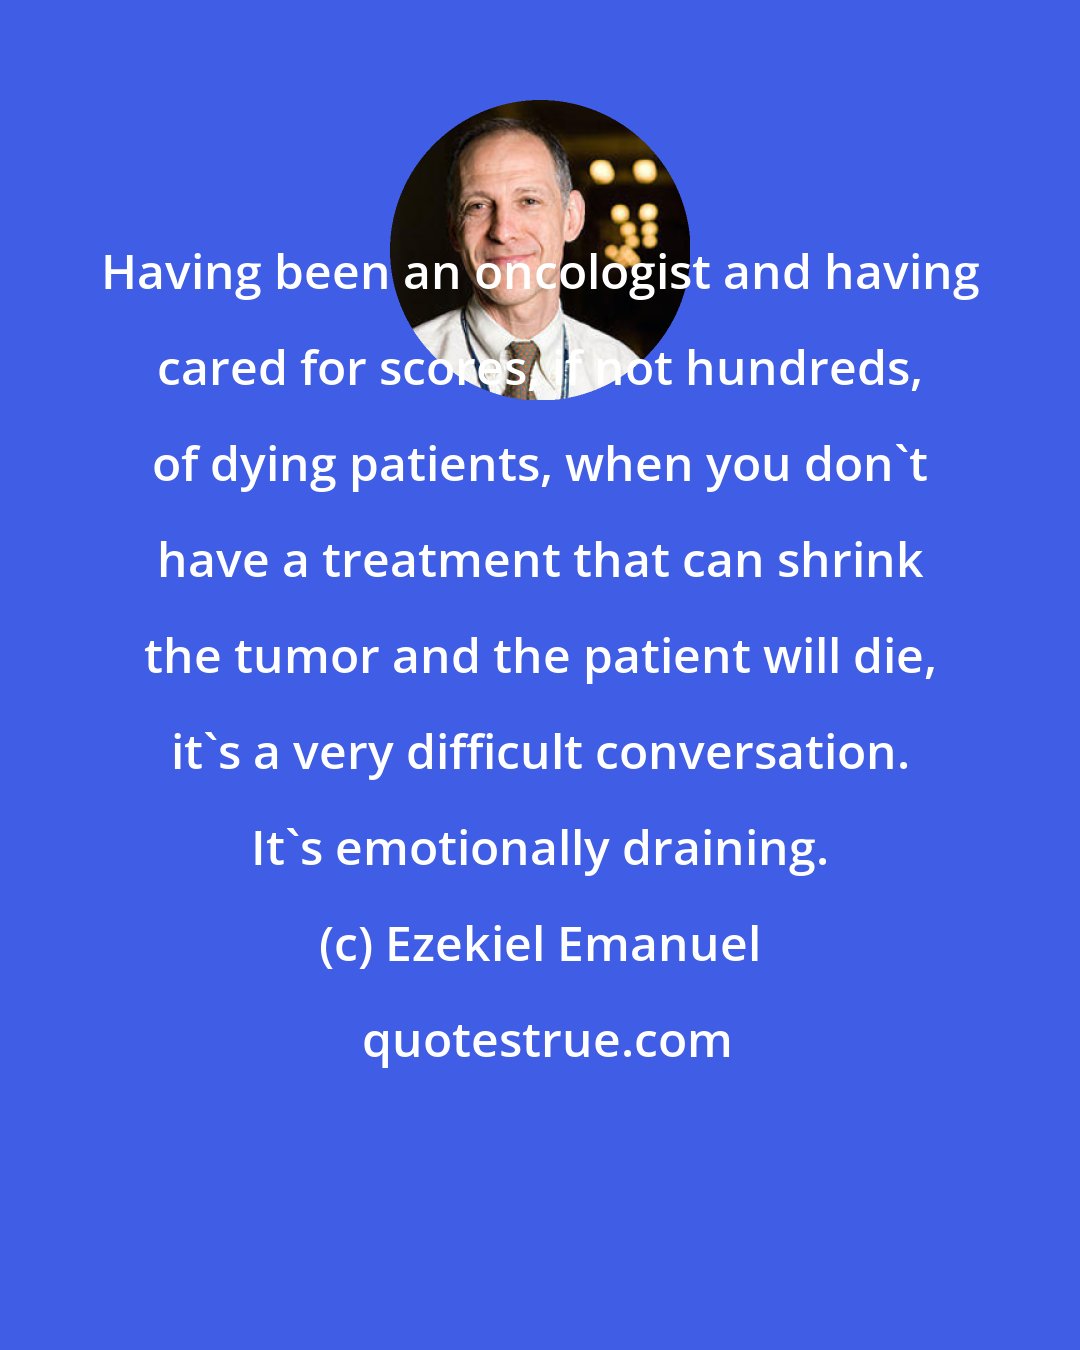 Ezekiel Emanuel: Having been an oncologist and having cared for scores, if not hundreds, of dying patients, when you don't have a treatment that can shrink the tumor and the patient will die, it's a very difficult conversation. It's emotionally draining.